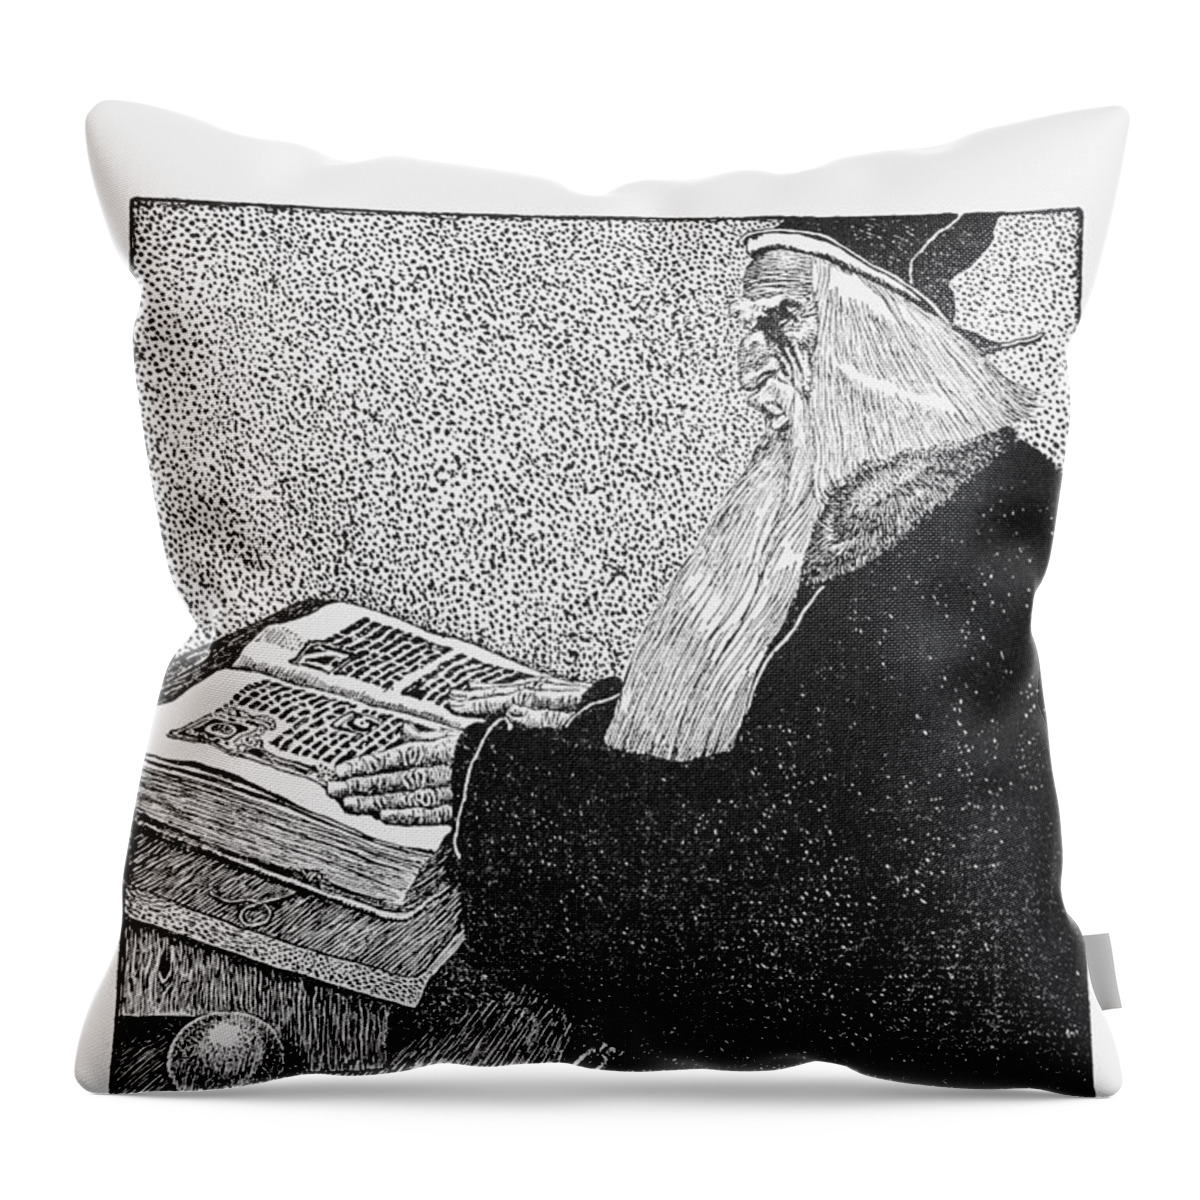 1903 Throw Pillow featuring the photograph Merlin by Granger